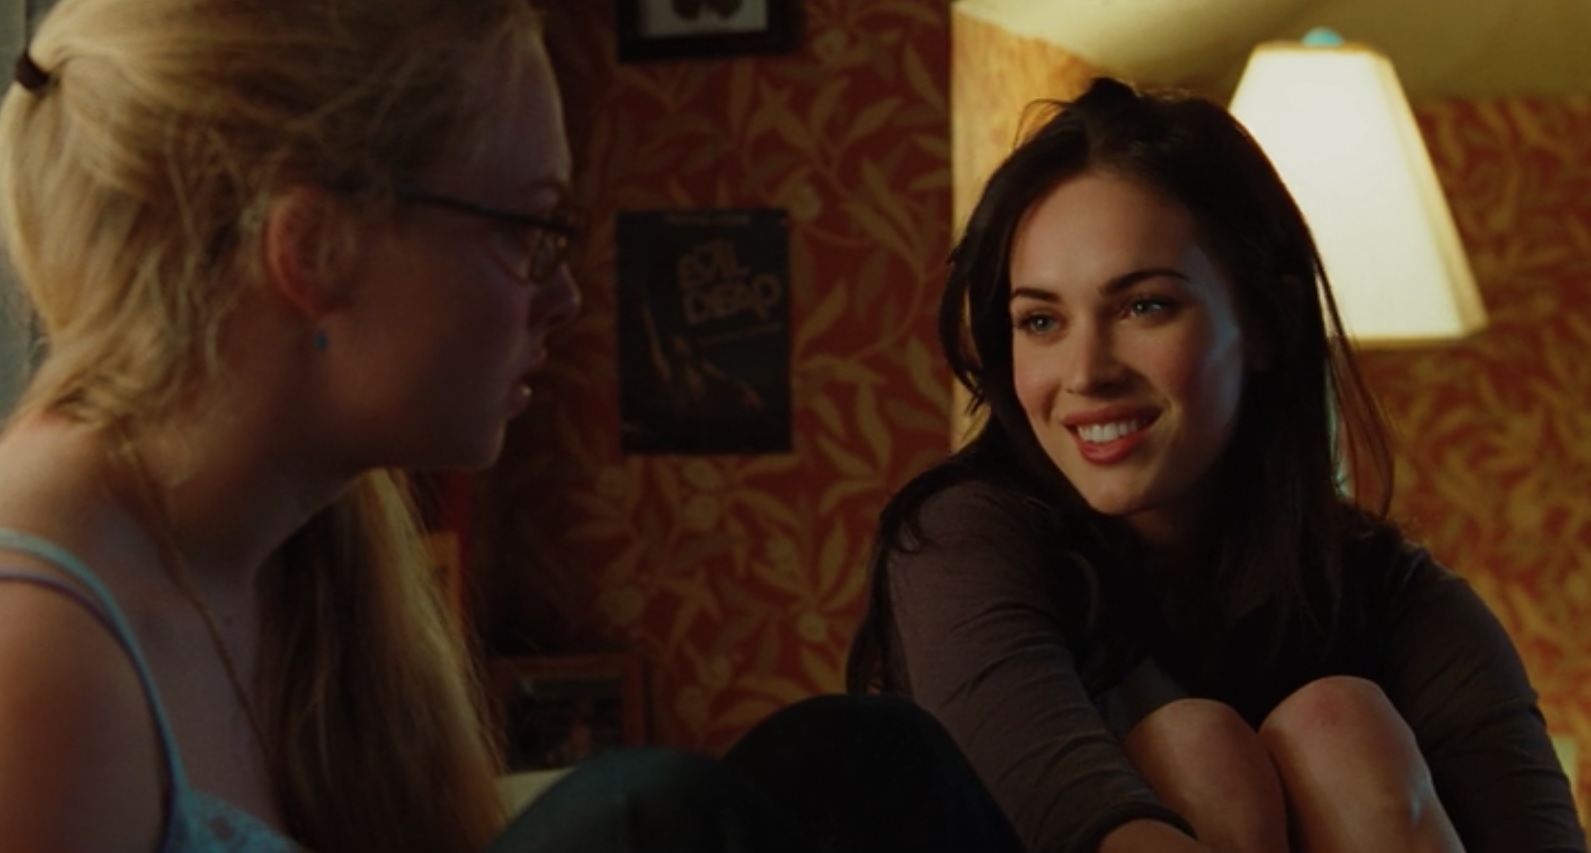 Kiss and Kill: Celebrated Sexuality in Jennifer's Body — NO CONTACT